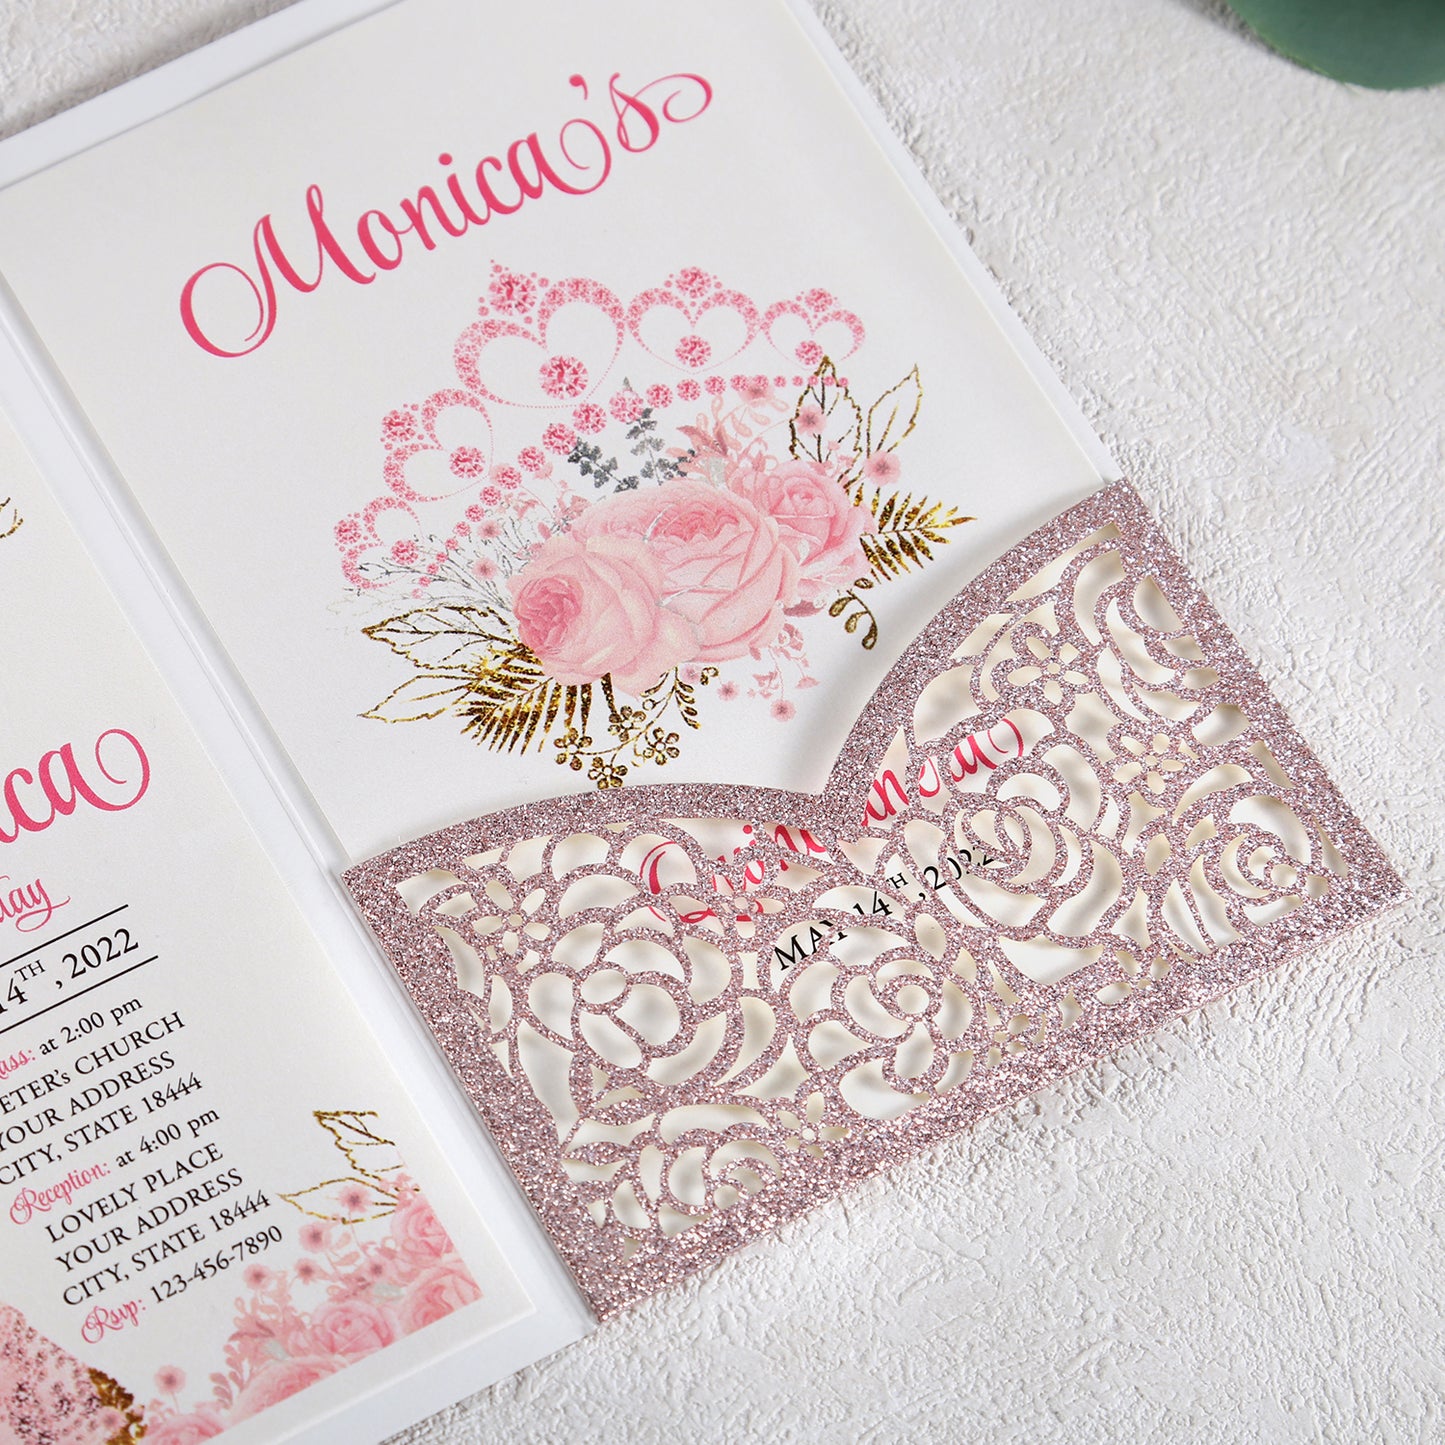 4.7 x7 inch Rose Gold Glitter Laser Cut Hollow Rose Wedding Invitations Cards with Glitter Pockets and Envelopes for Quincenera Birthday Party - DorisHome